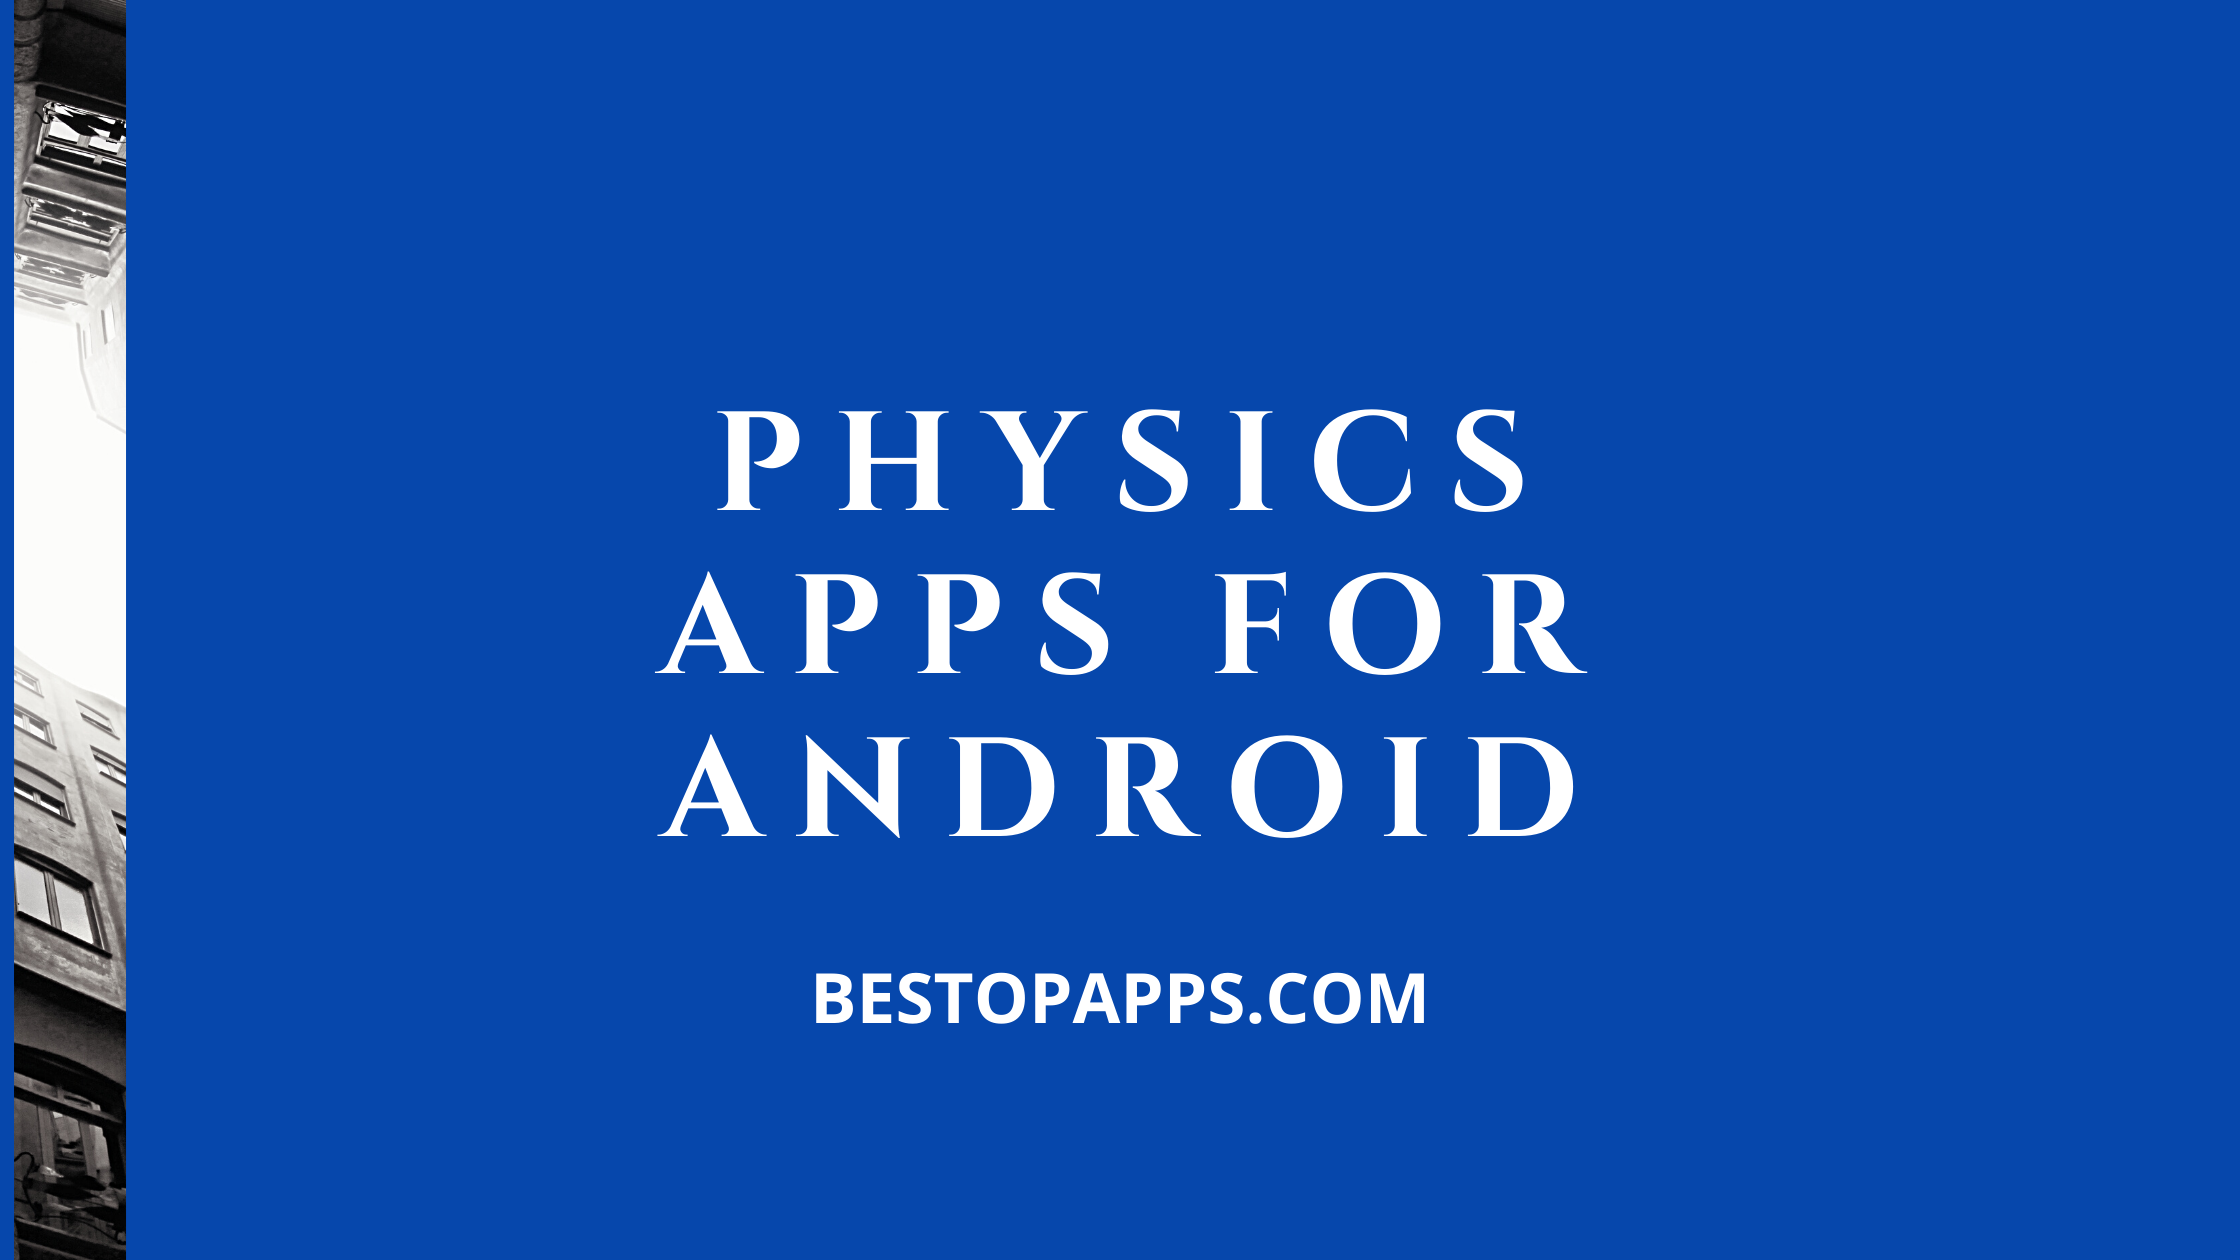 Physics Apps for Android